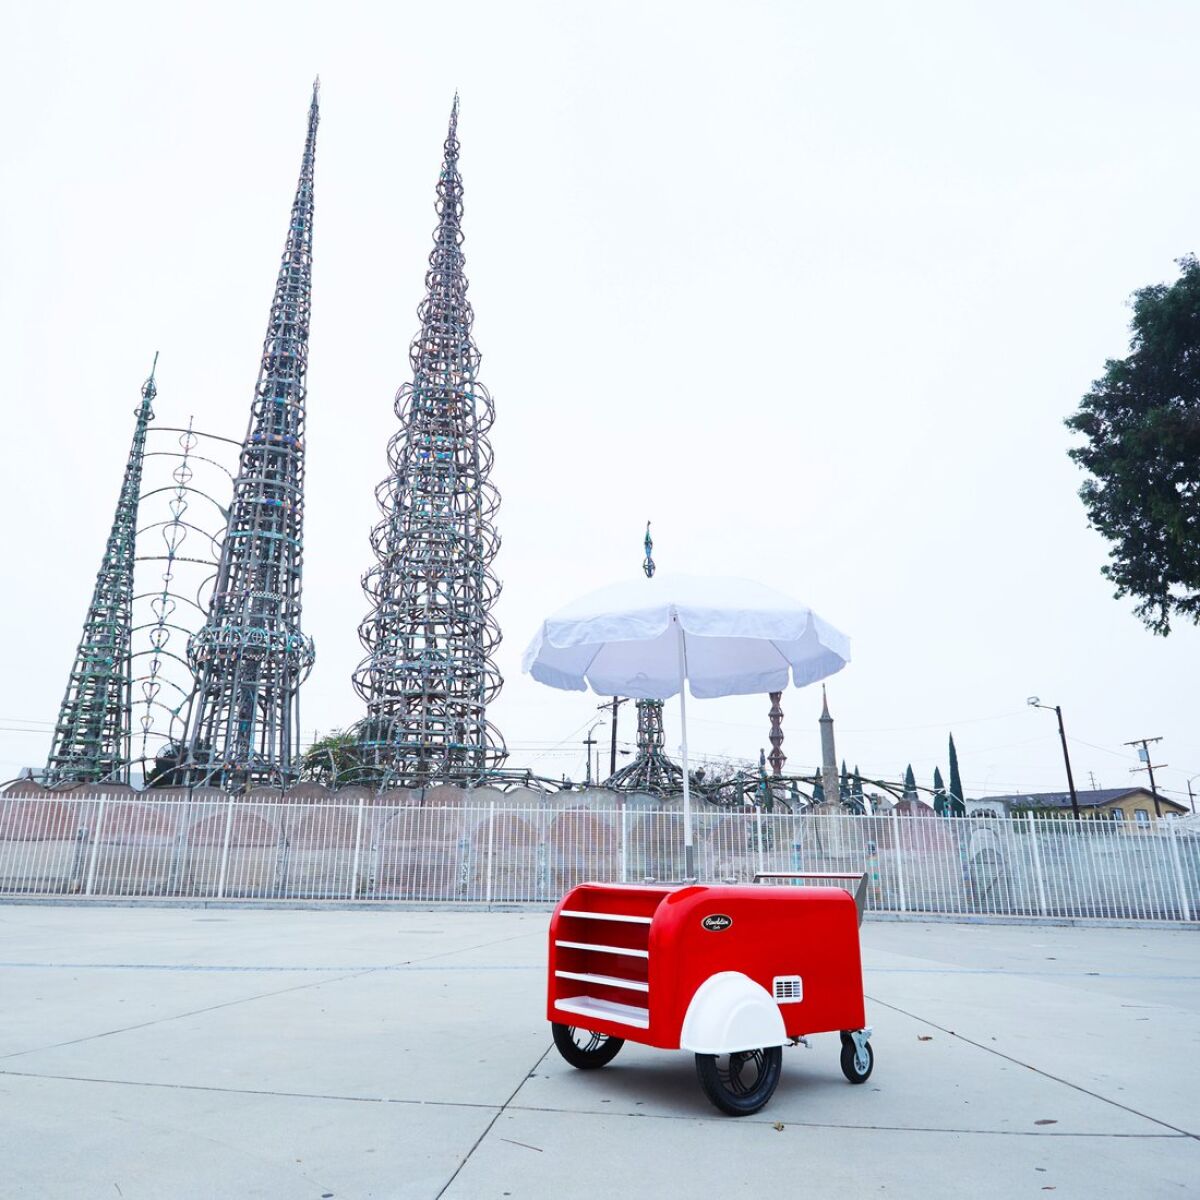 A cherry red sidewalk vending cart with a white umbrella is shown parked in front of the Watts Towers